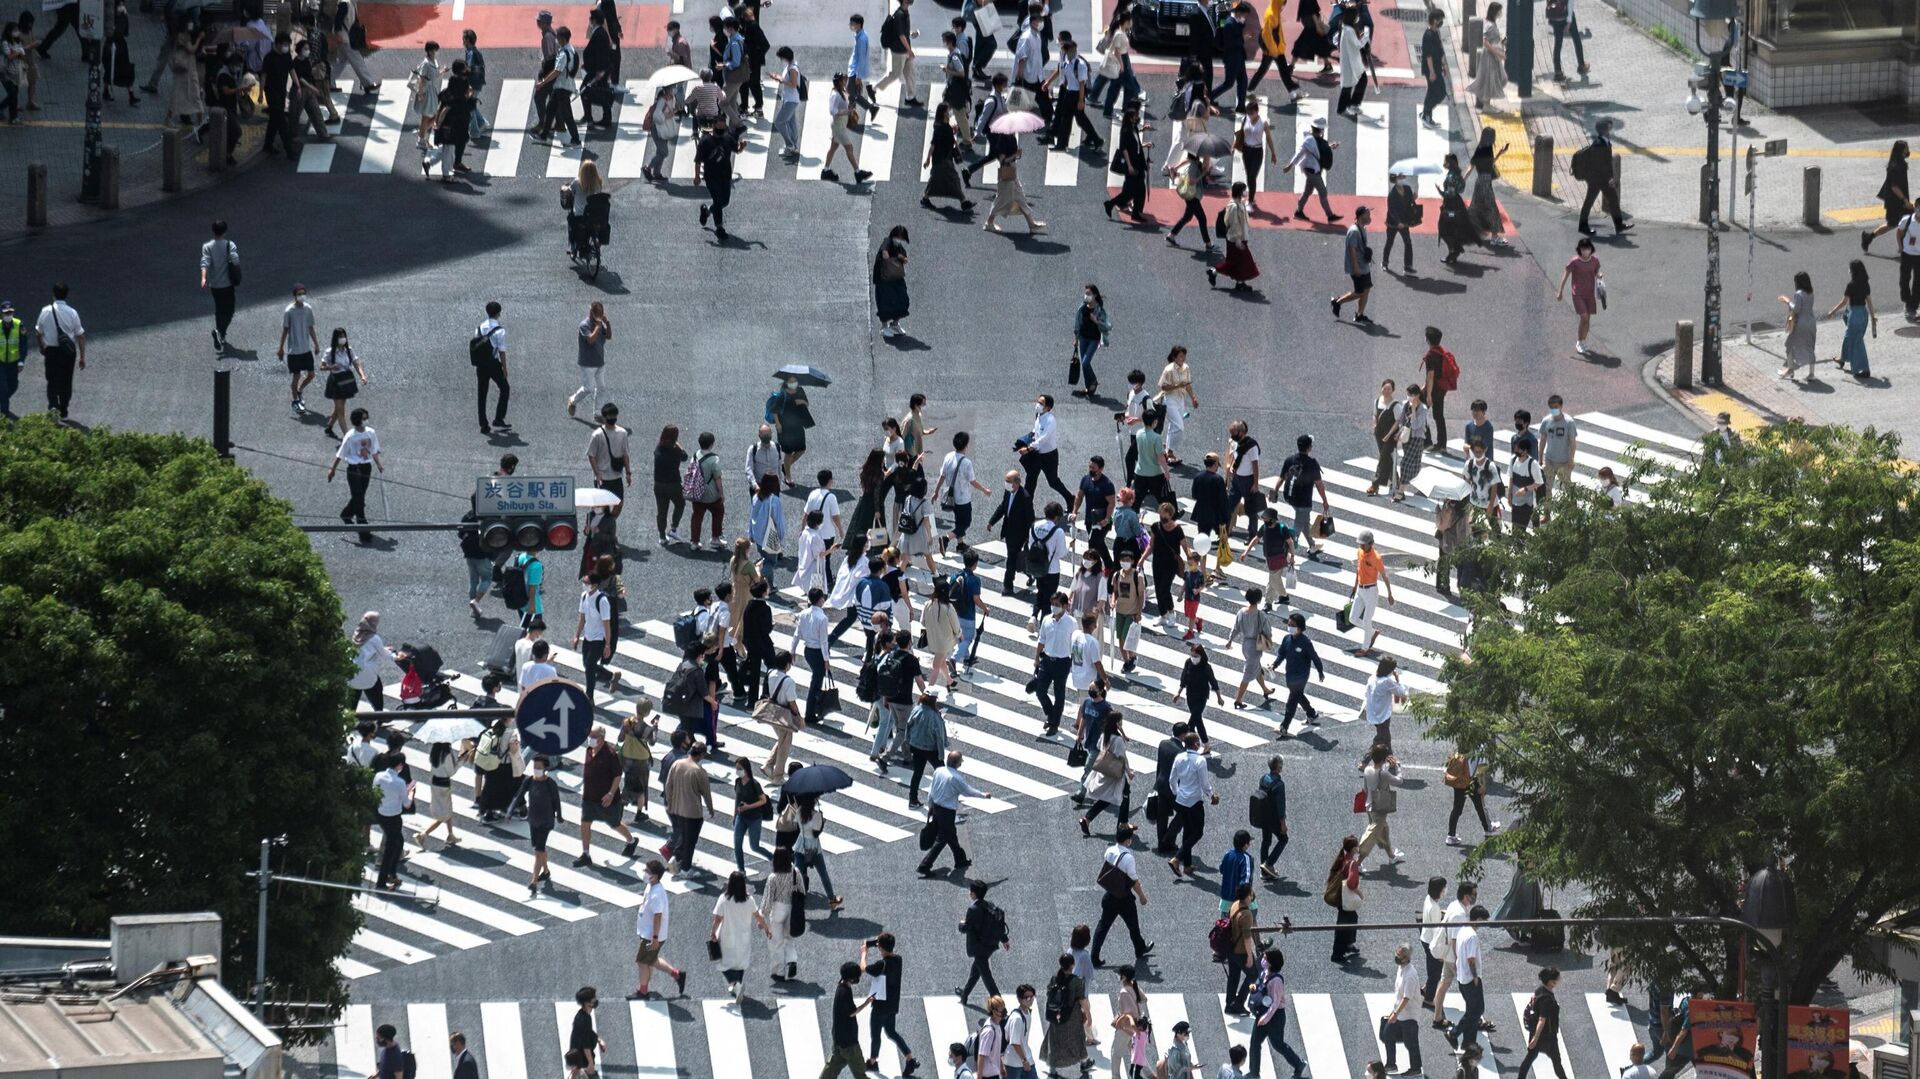 This general view shows people crossing the street in Tokyo’s Shibuya district on June 17, 2021 - Sputnik International, 1920, 11.09.2021